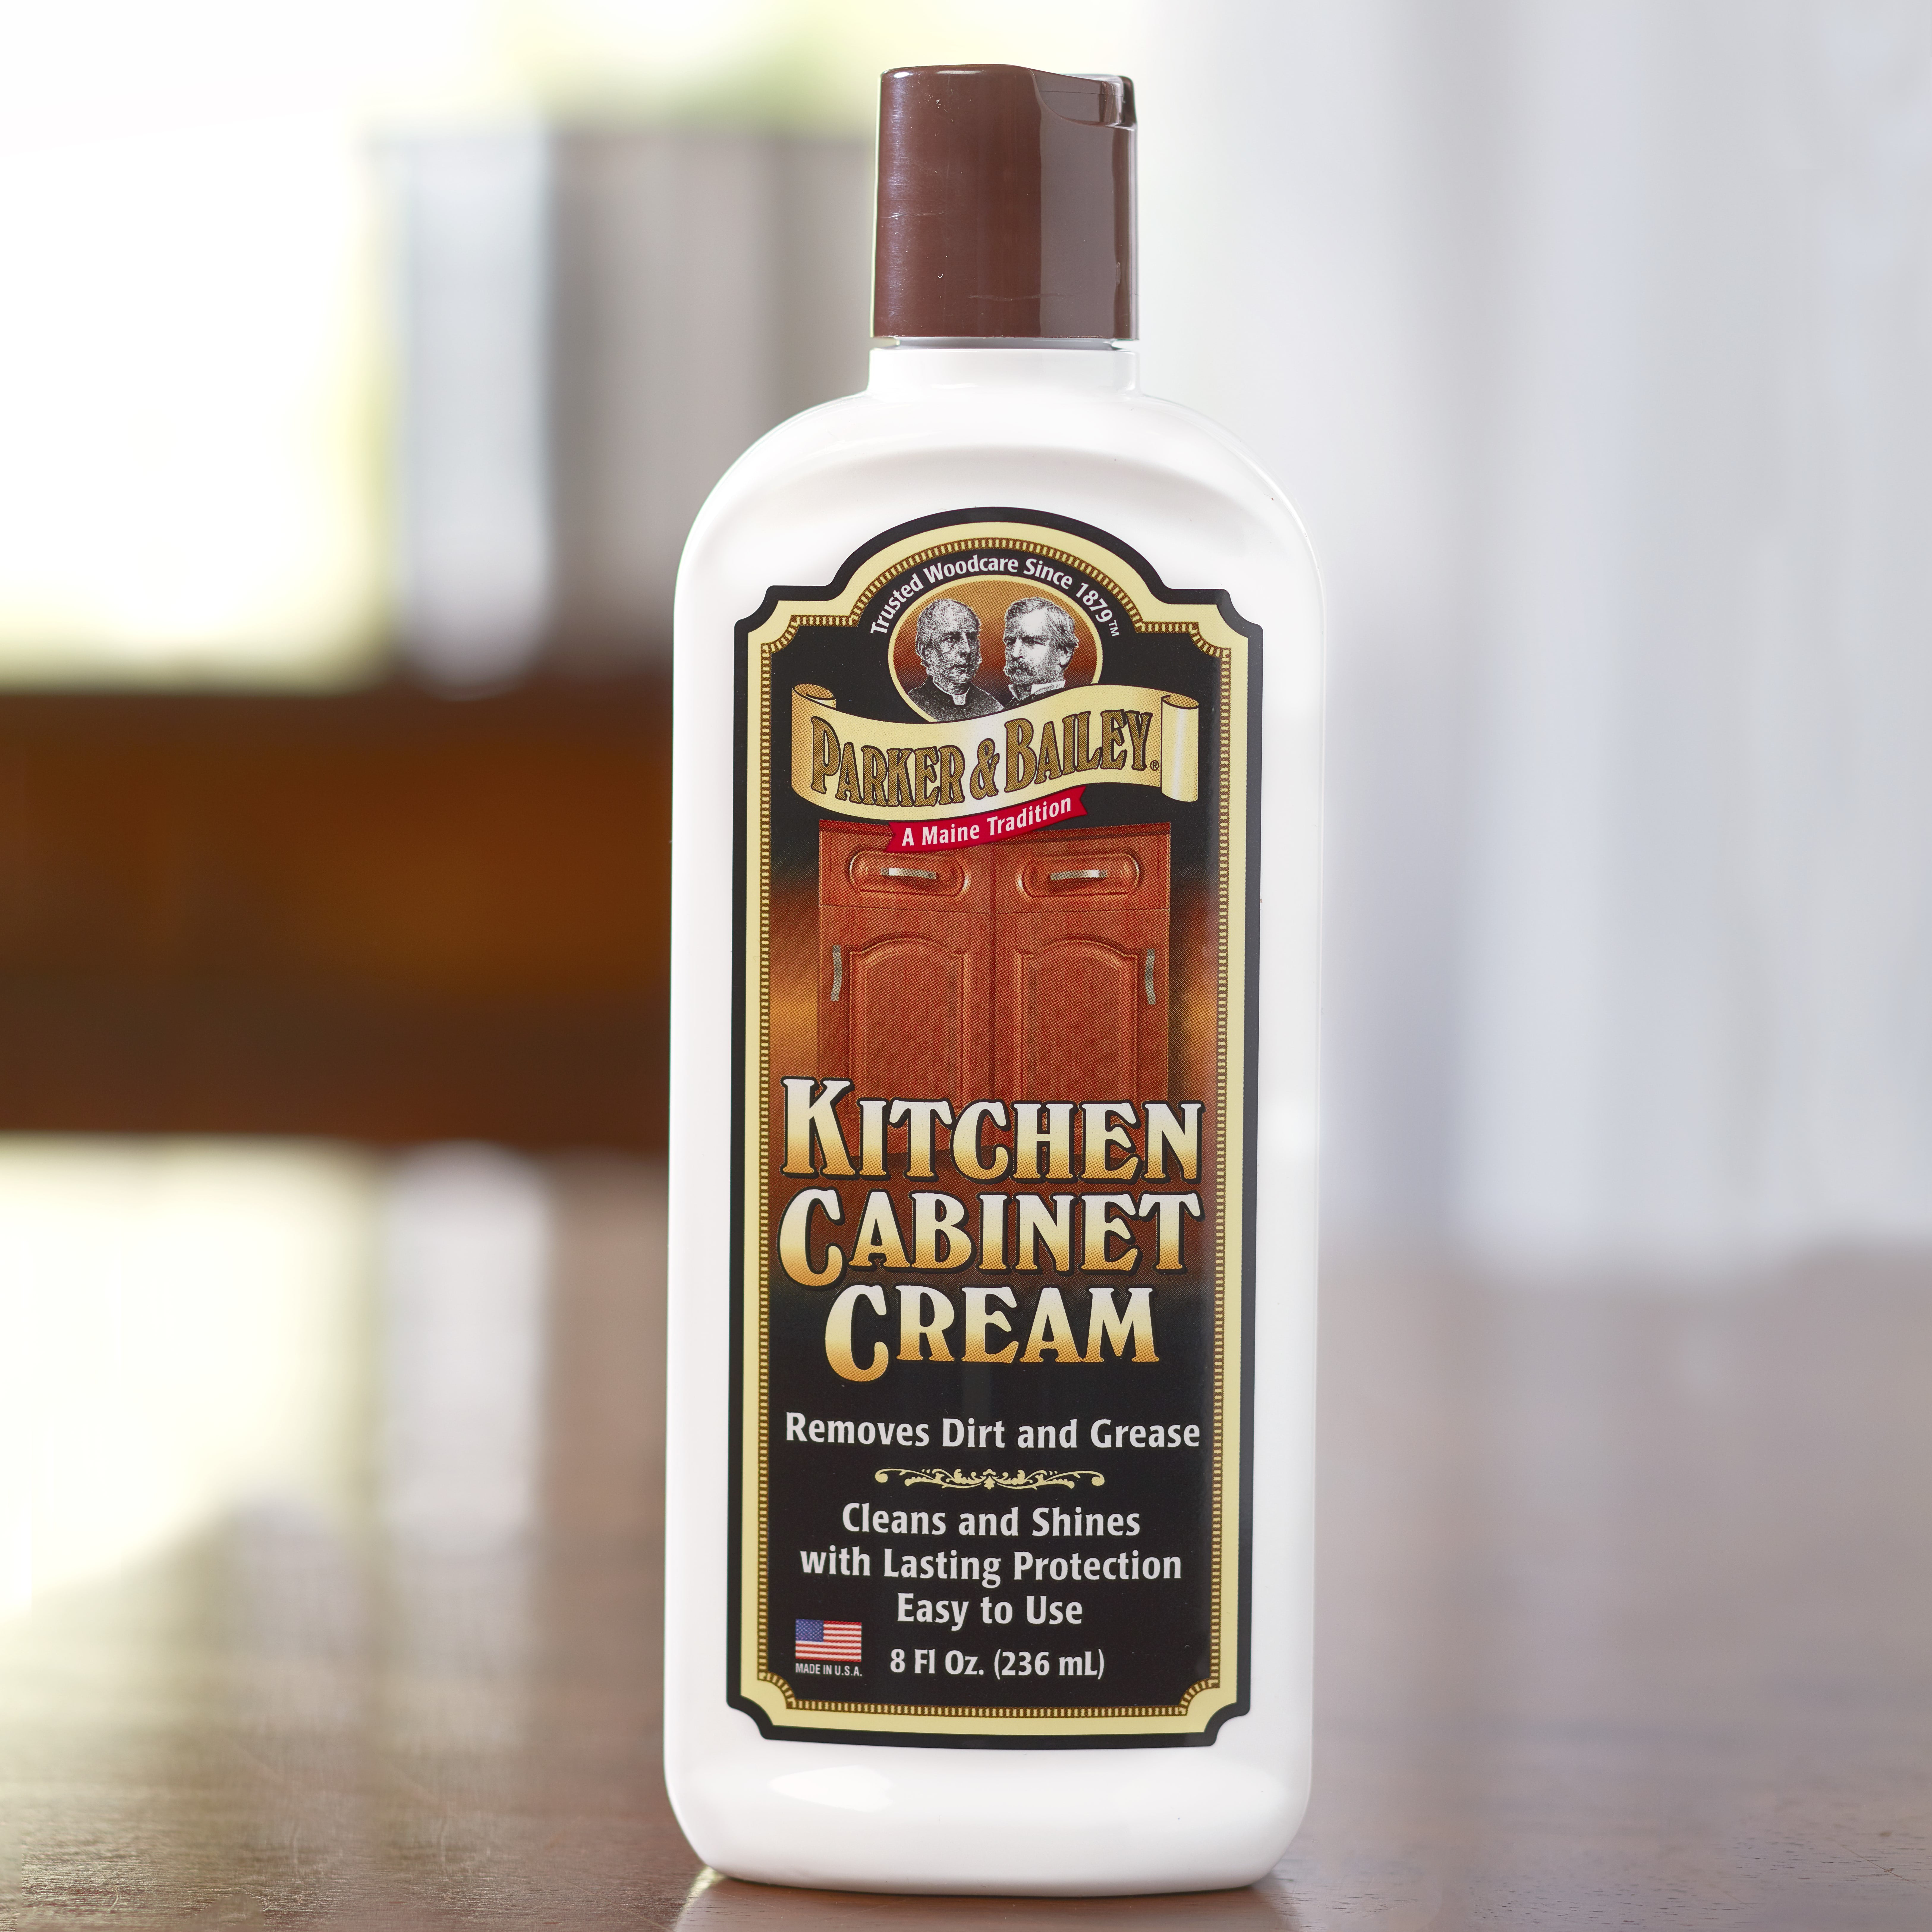 Parker And Bailey Kitchen Cabinet Cream Review